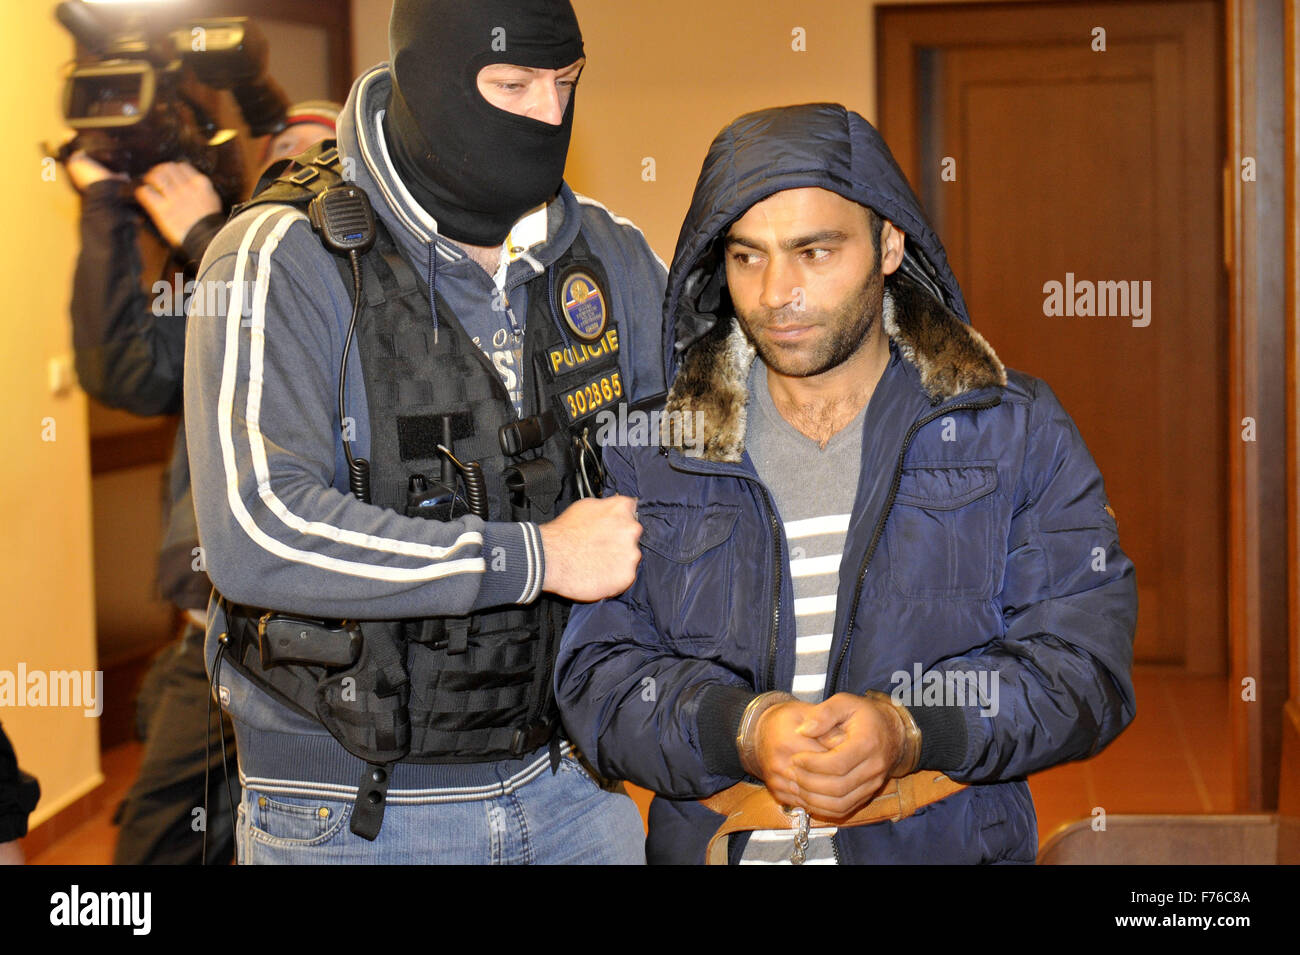 Hradec Kralove, Czech Republic. 26th November, 2015. The Czech police arrest 30-year-old Turk linked to terrorists, in Hradec Kralove, East Bohemia, on November 26, 2015. Police detained him within a road control, after choosing his vehicle based on its foreign number plate, check on Tuesday. Turk who was Interpol-wanted because he is convicted of a crime with a terrorist subtext, according to unofficial information. Credit:  CTK/Alamy Live News Stock Photo